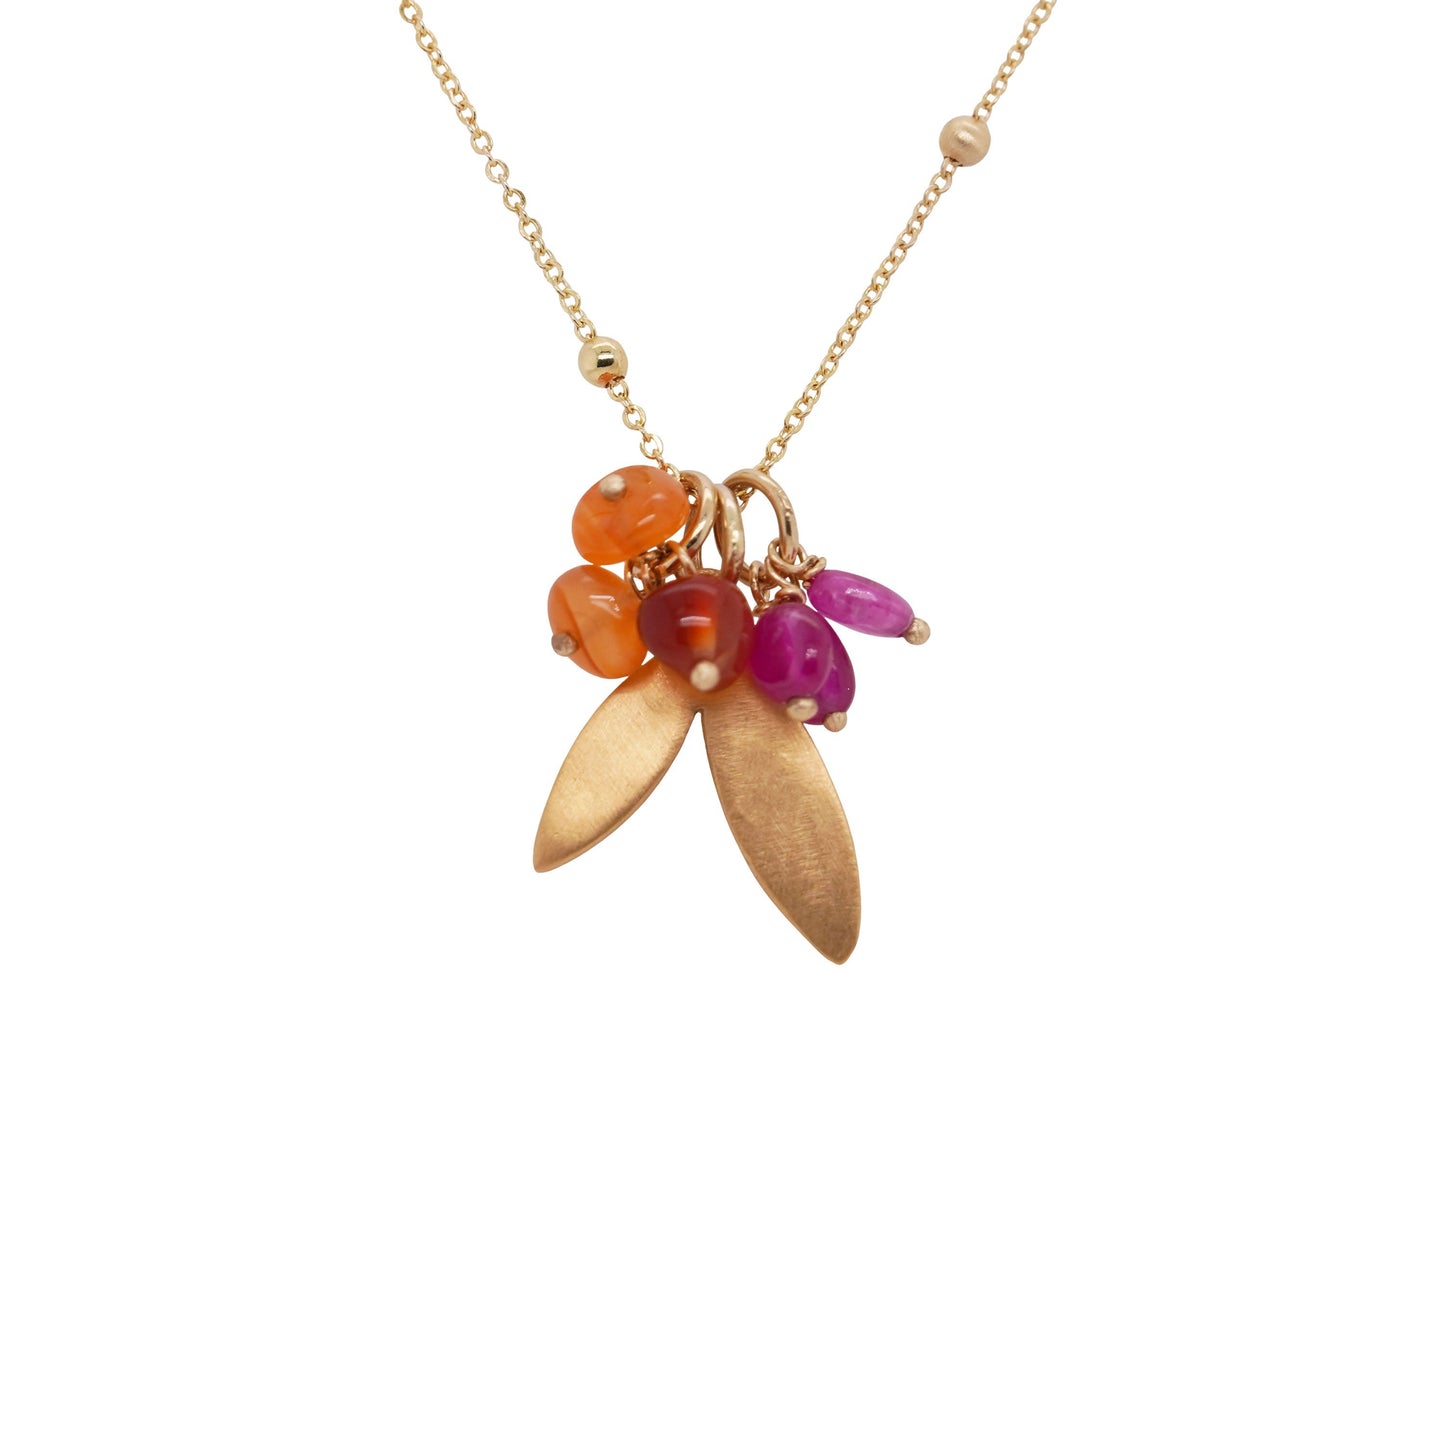 Ruby, Carnelian, and Gold Charm Necklace